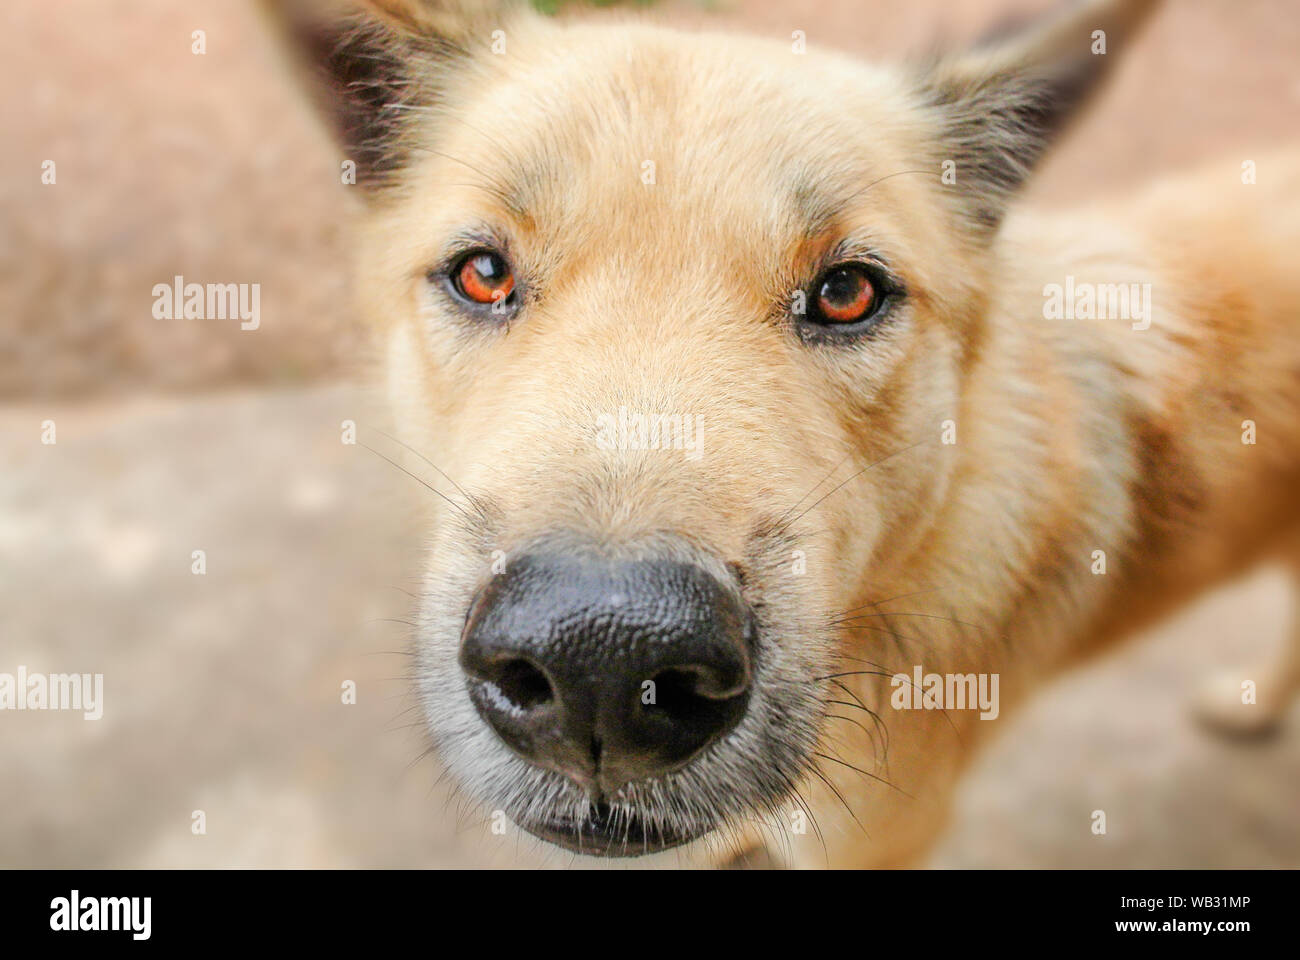 Dog's eyes are full of questions and want to fight. He's also a man's best friend too. Stock Photo